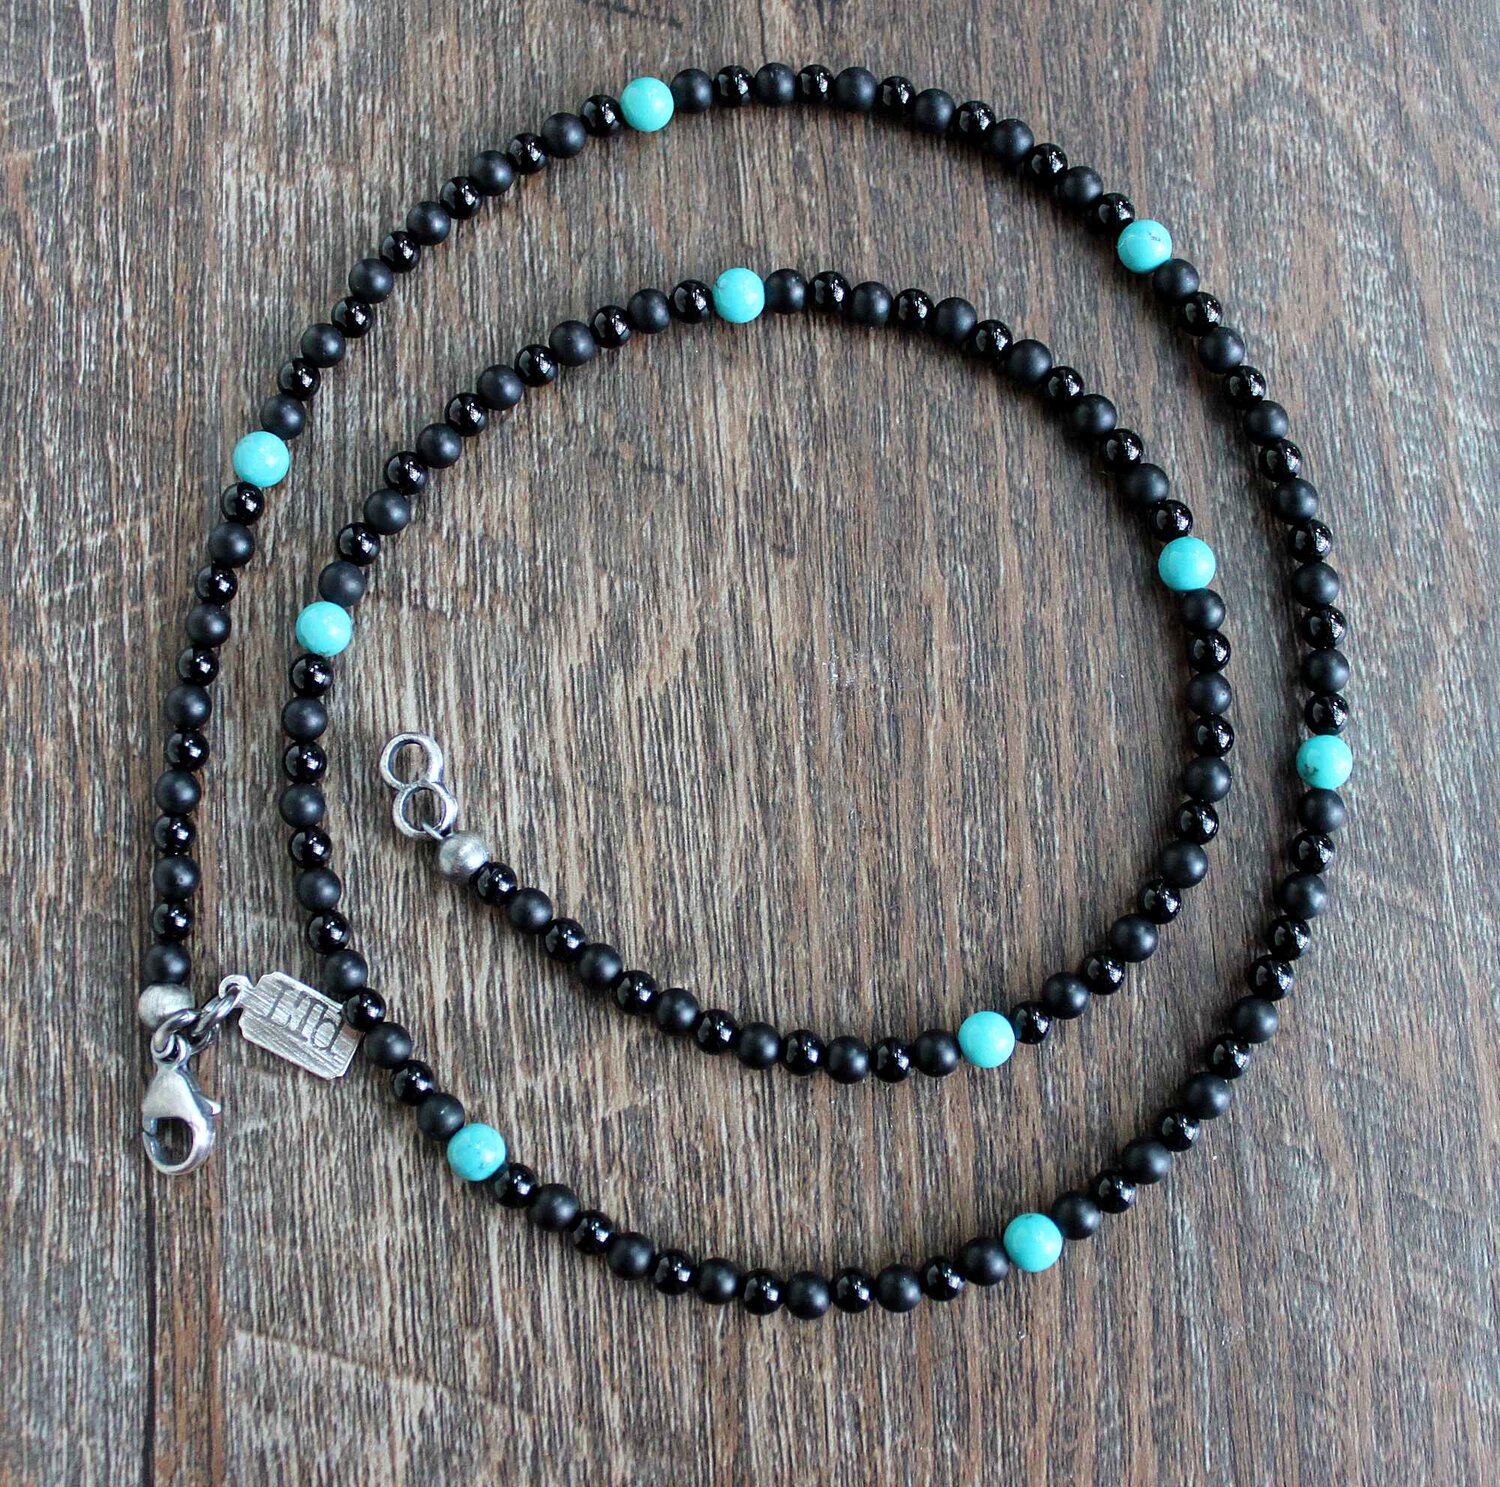 Black Onyx and Multi-Turquoise Candy Necklace